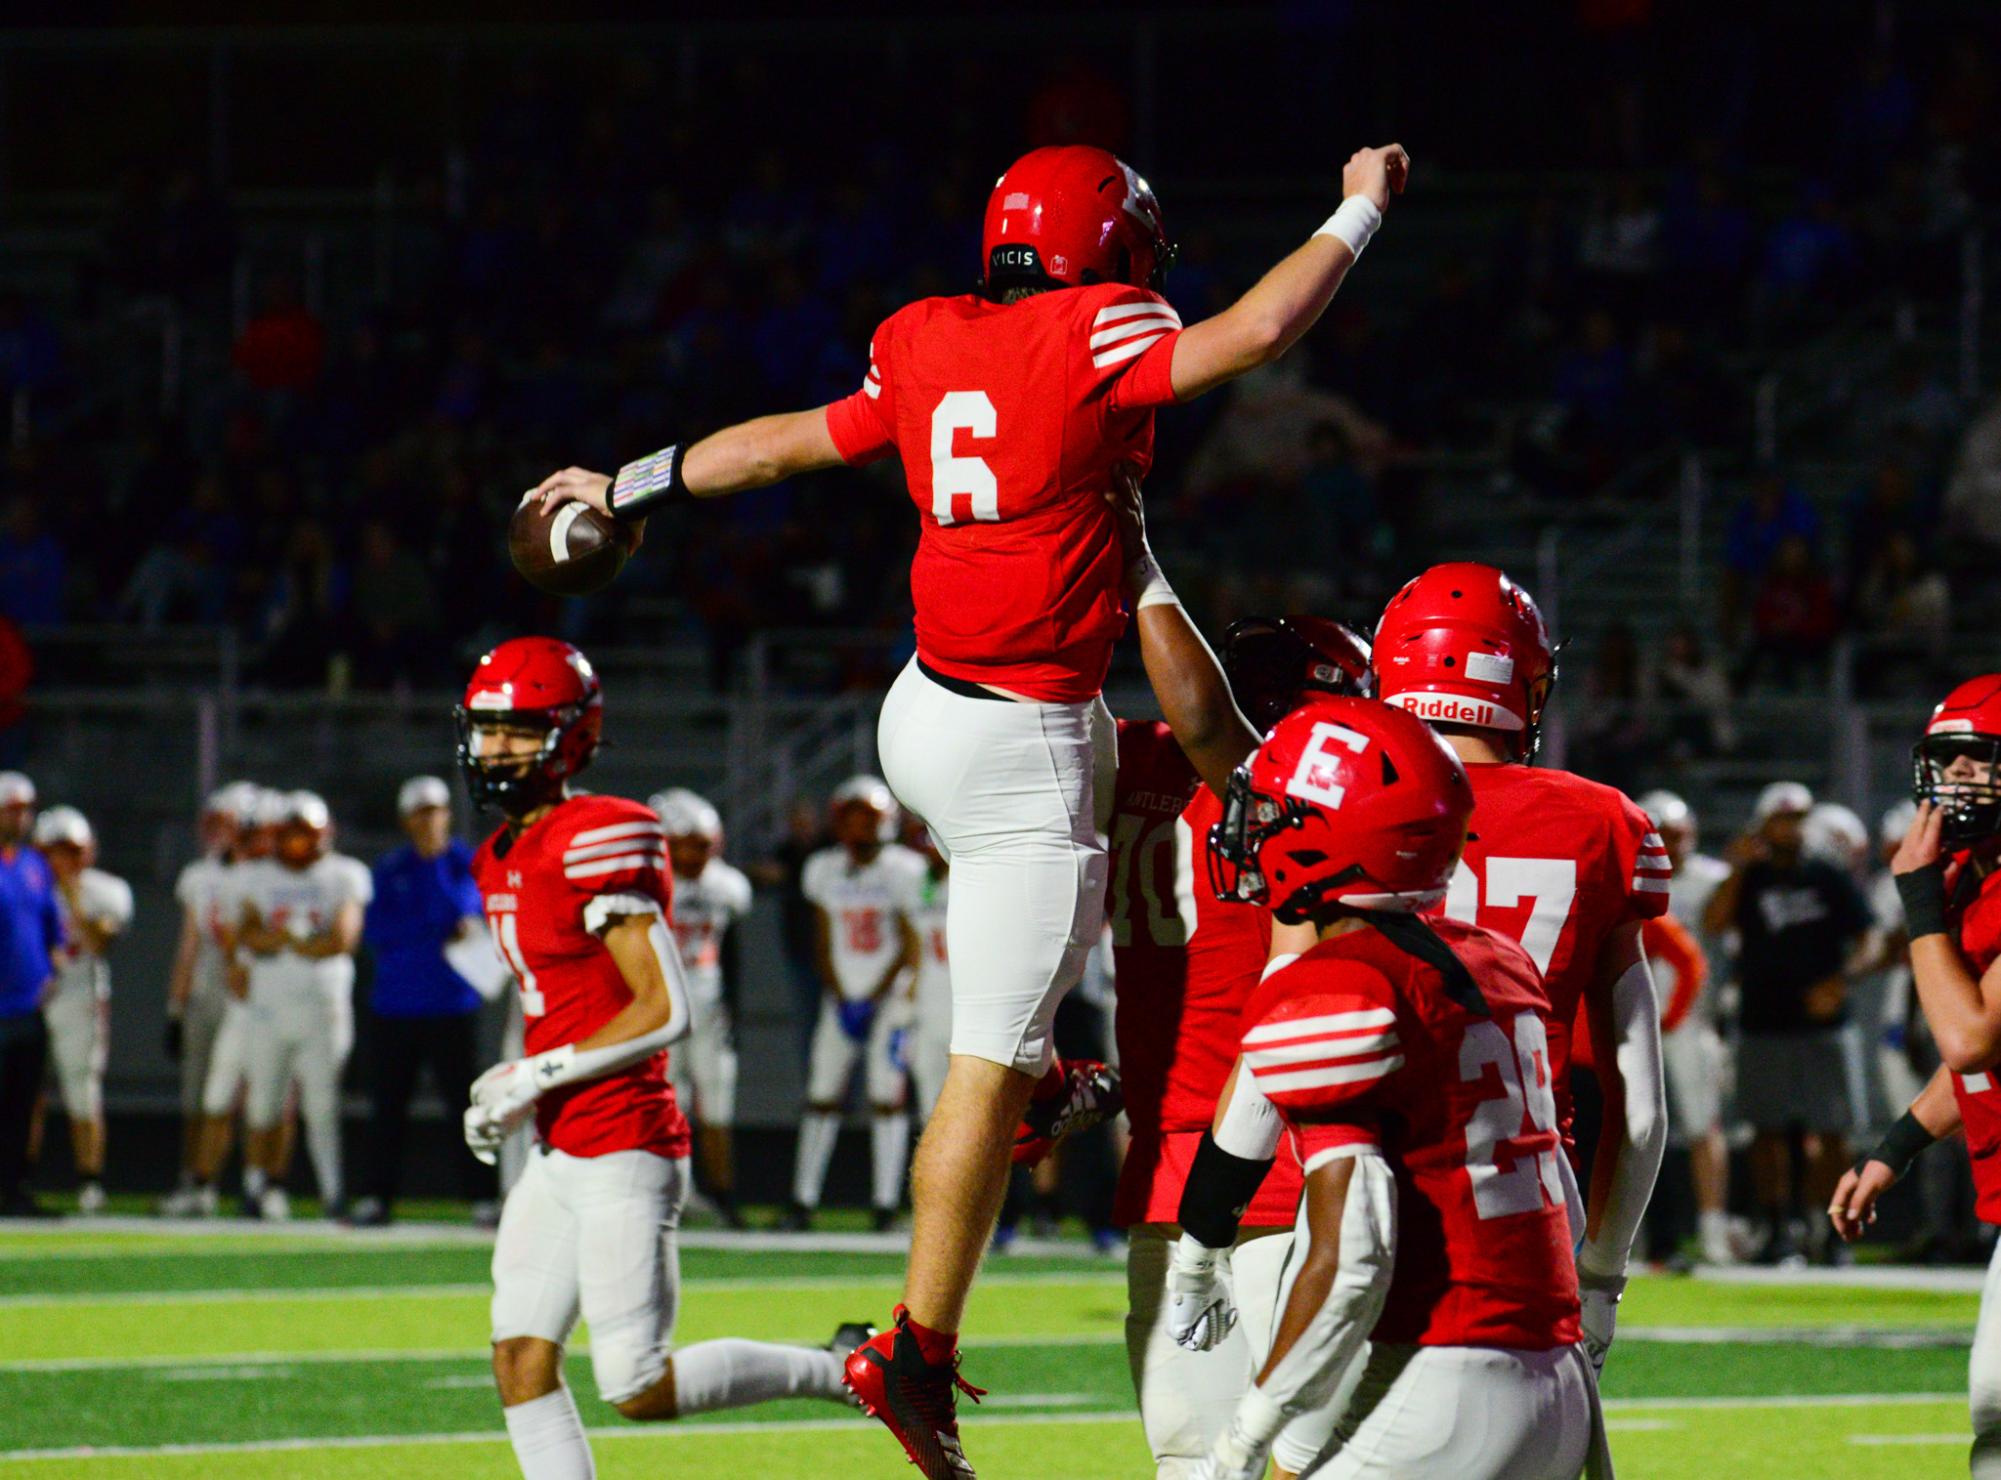 Junior Kayd Matthews celebrates after a touchdown in the Antlers win against Westview. Elkhorn won 42-14.